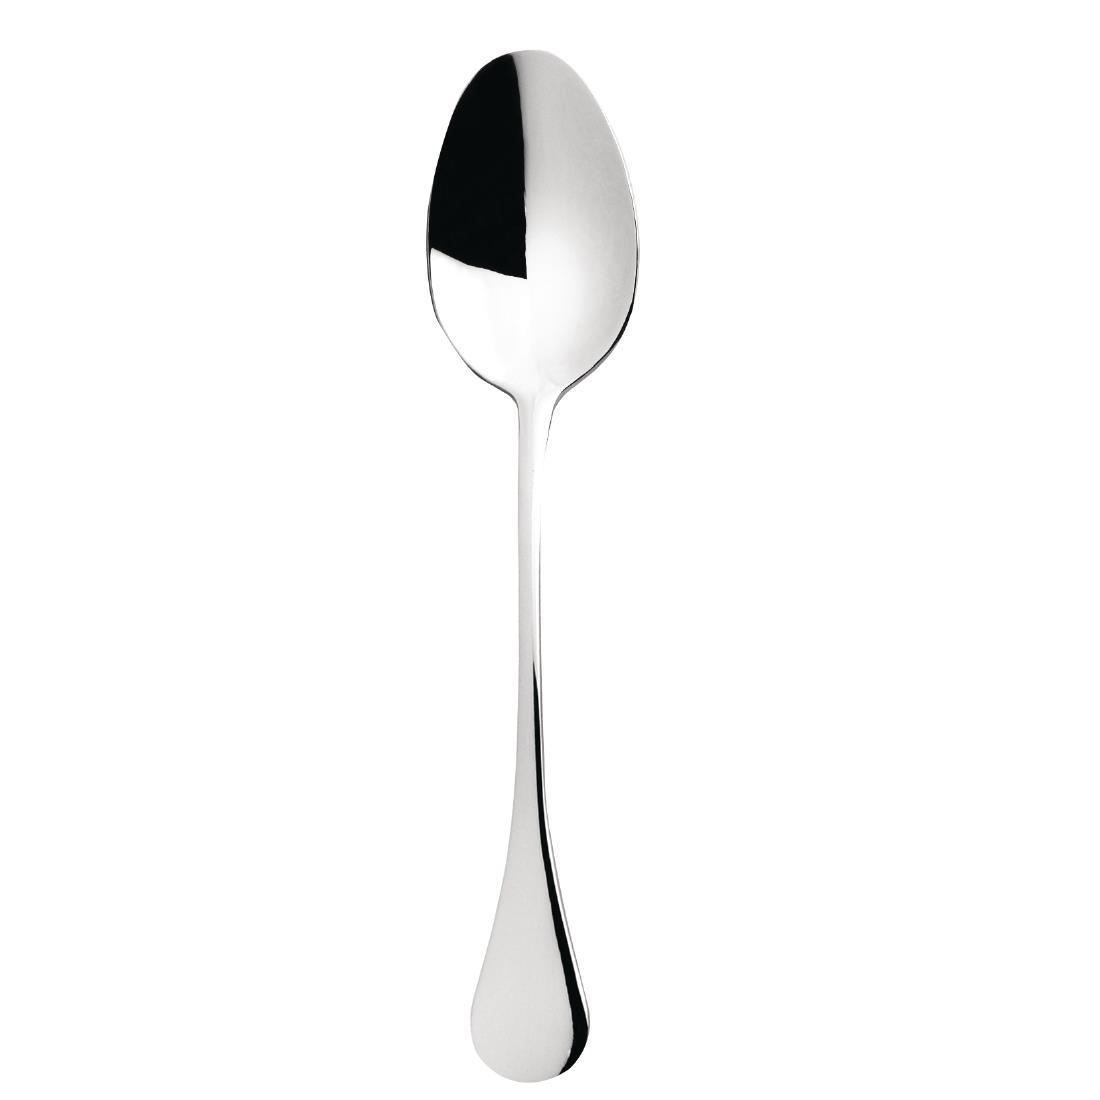 Olympia Paganini Table spoon (Pack of 12) - GM455  - 2